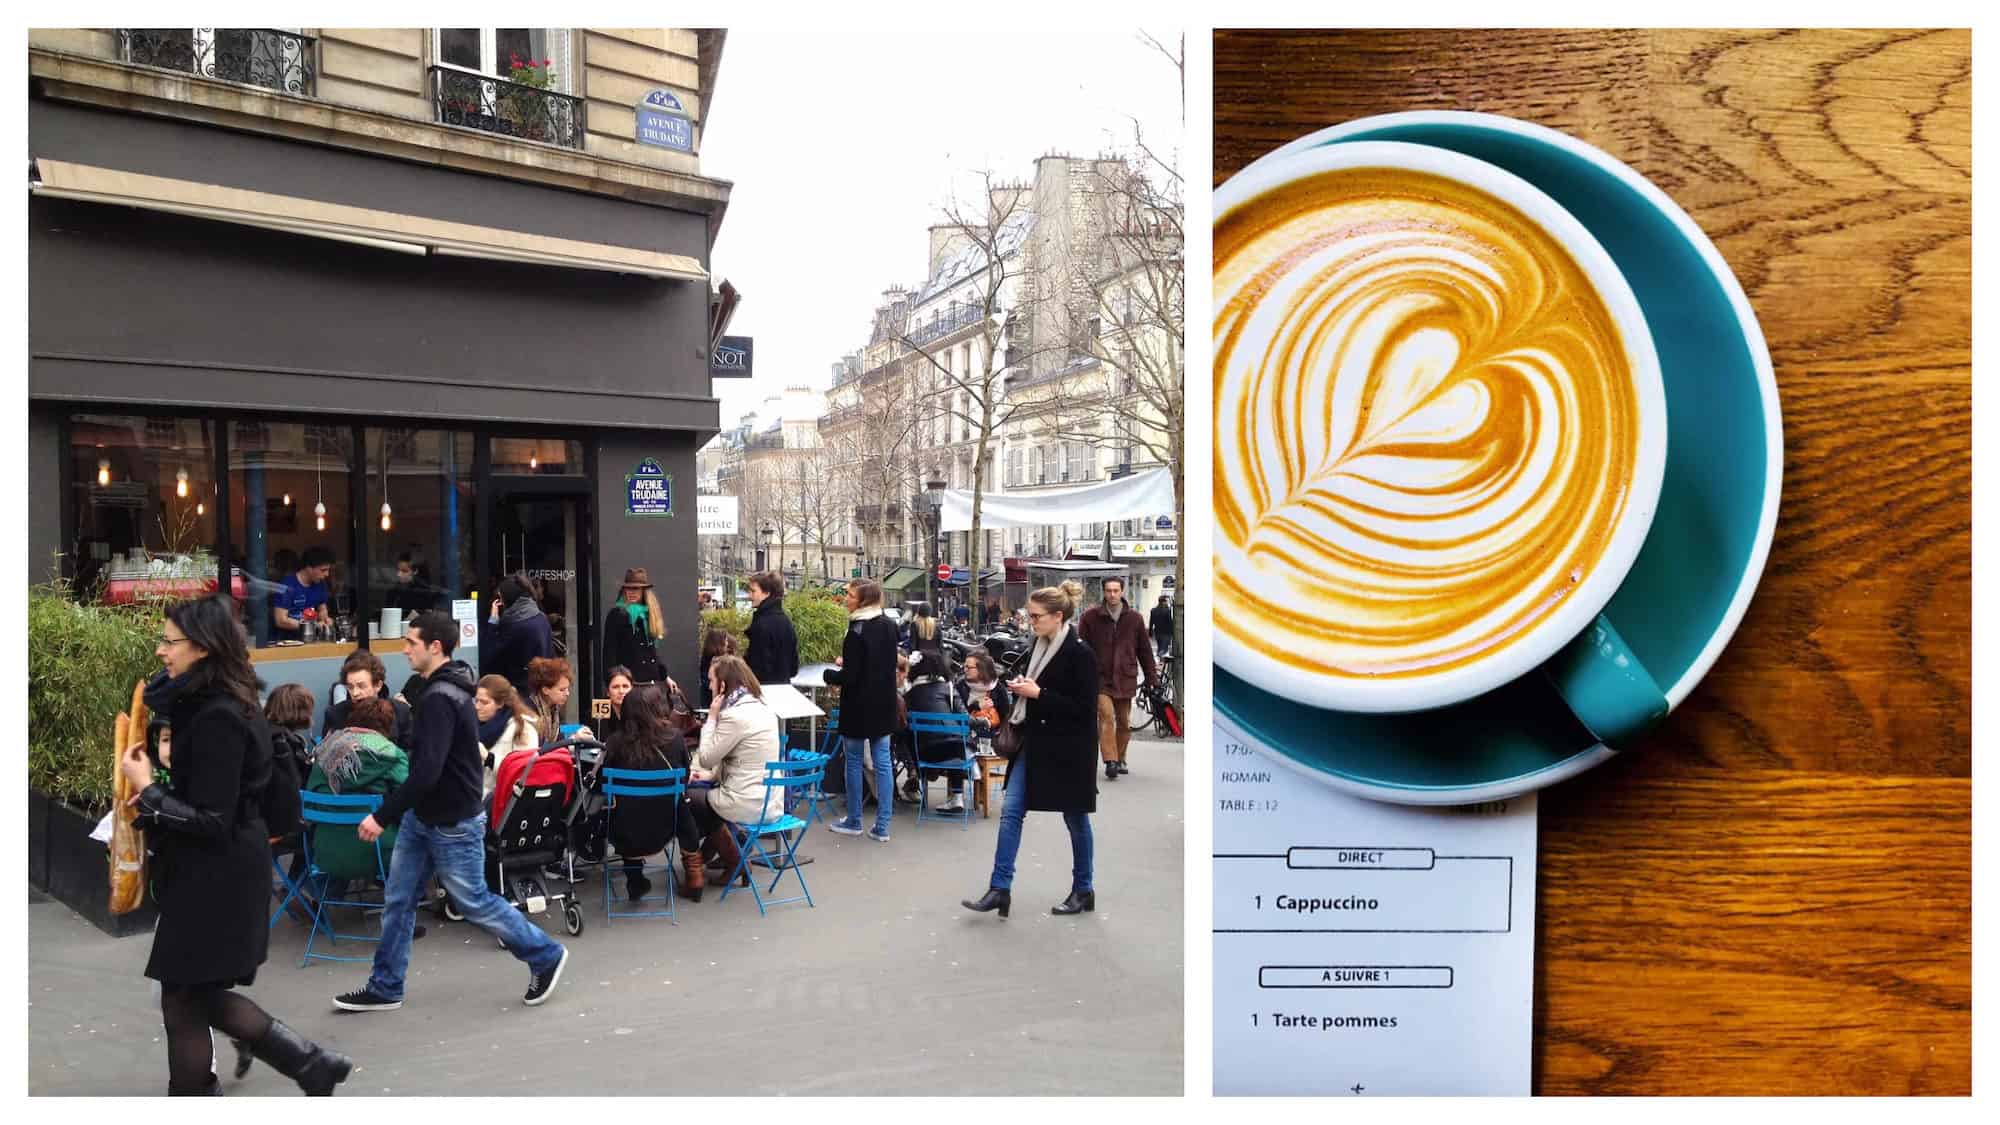 The terrace (left) and latté with creamy swirls in a blue cup on a wooden table (right) at KB Coffee Shop in Paris.